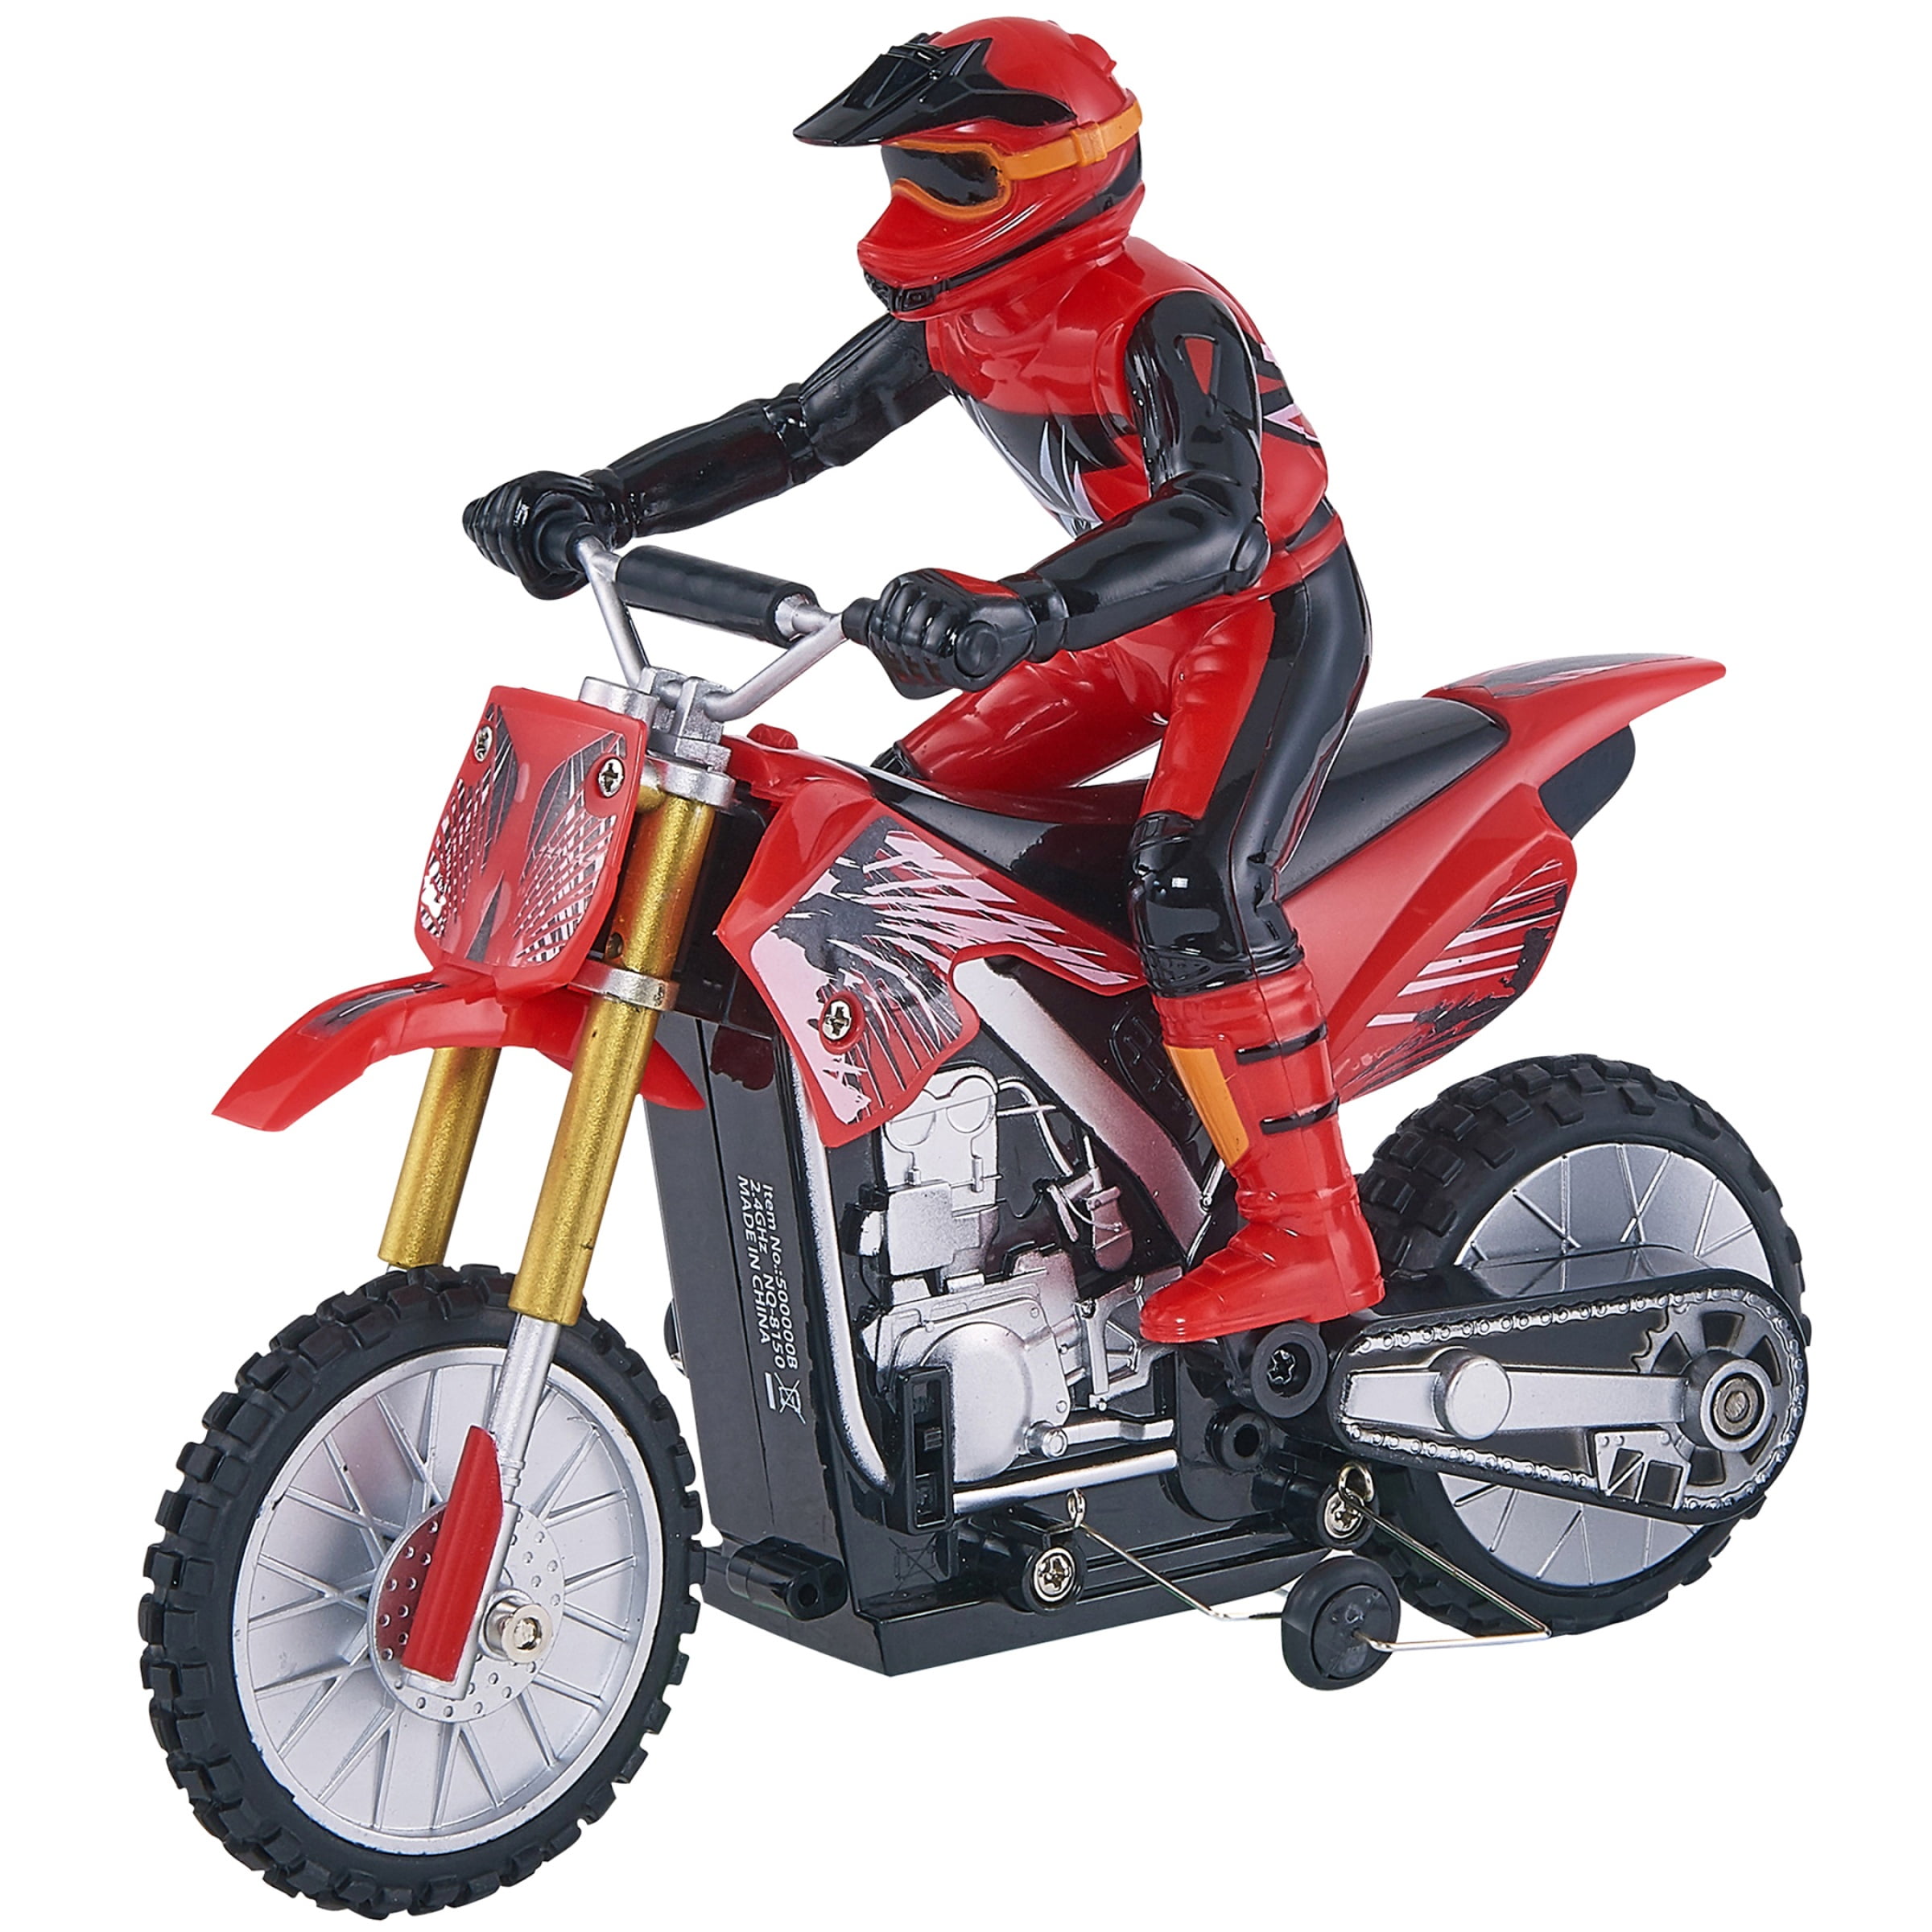 Adventure Force Motocross Bike Radio Controlled Vehicle, Red